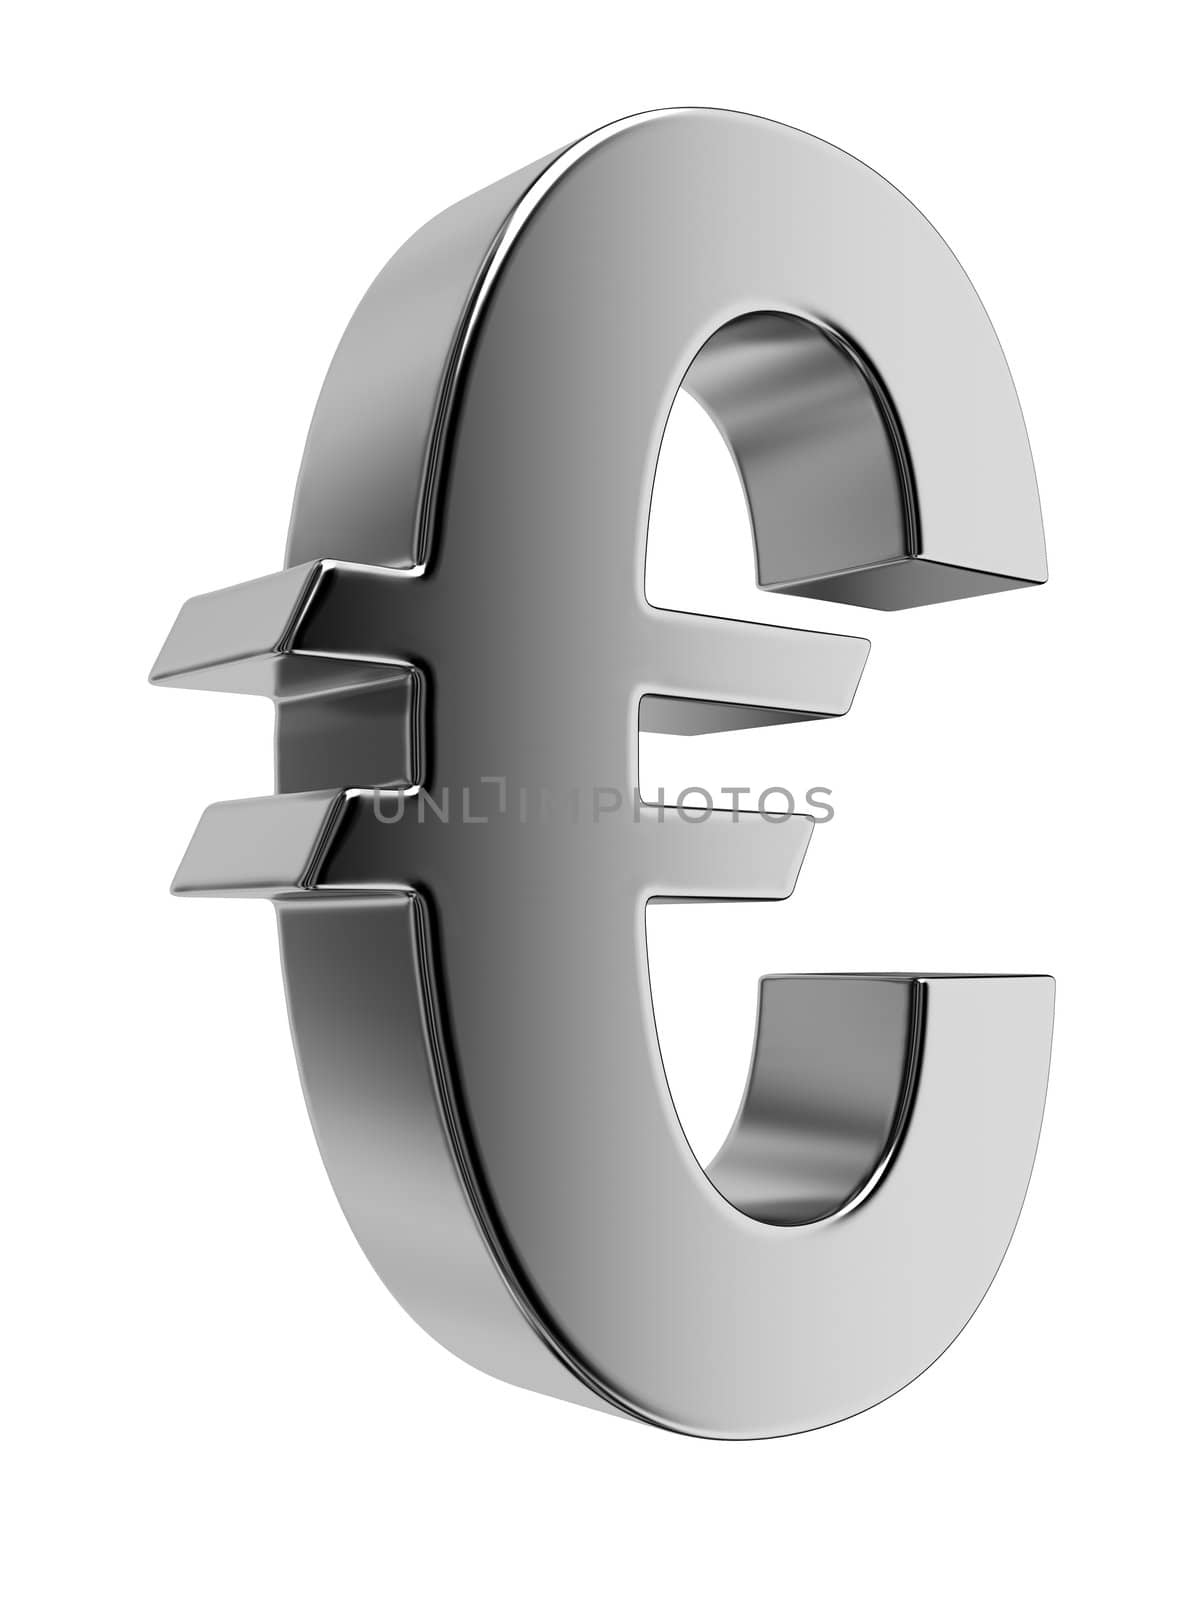 Metallic euro sign. High resolution rendered in 3D.